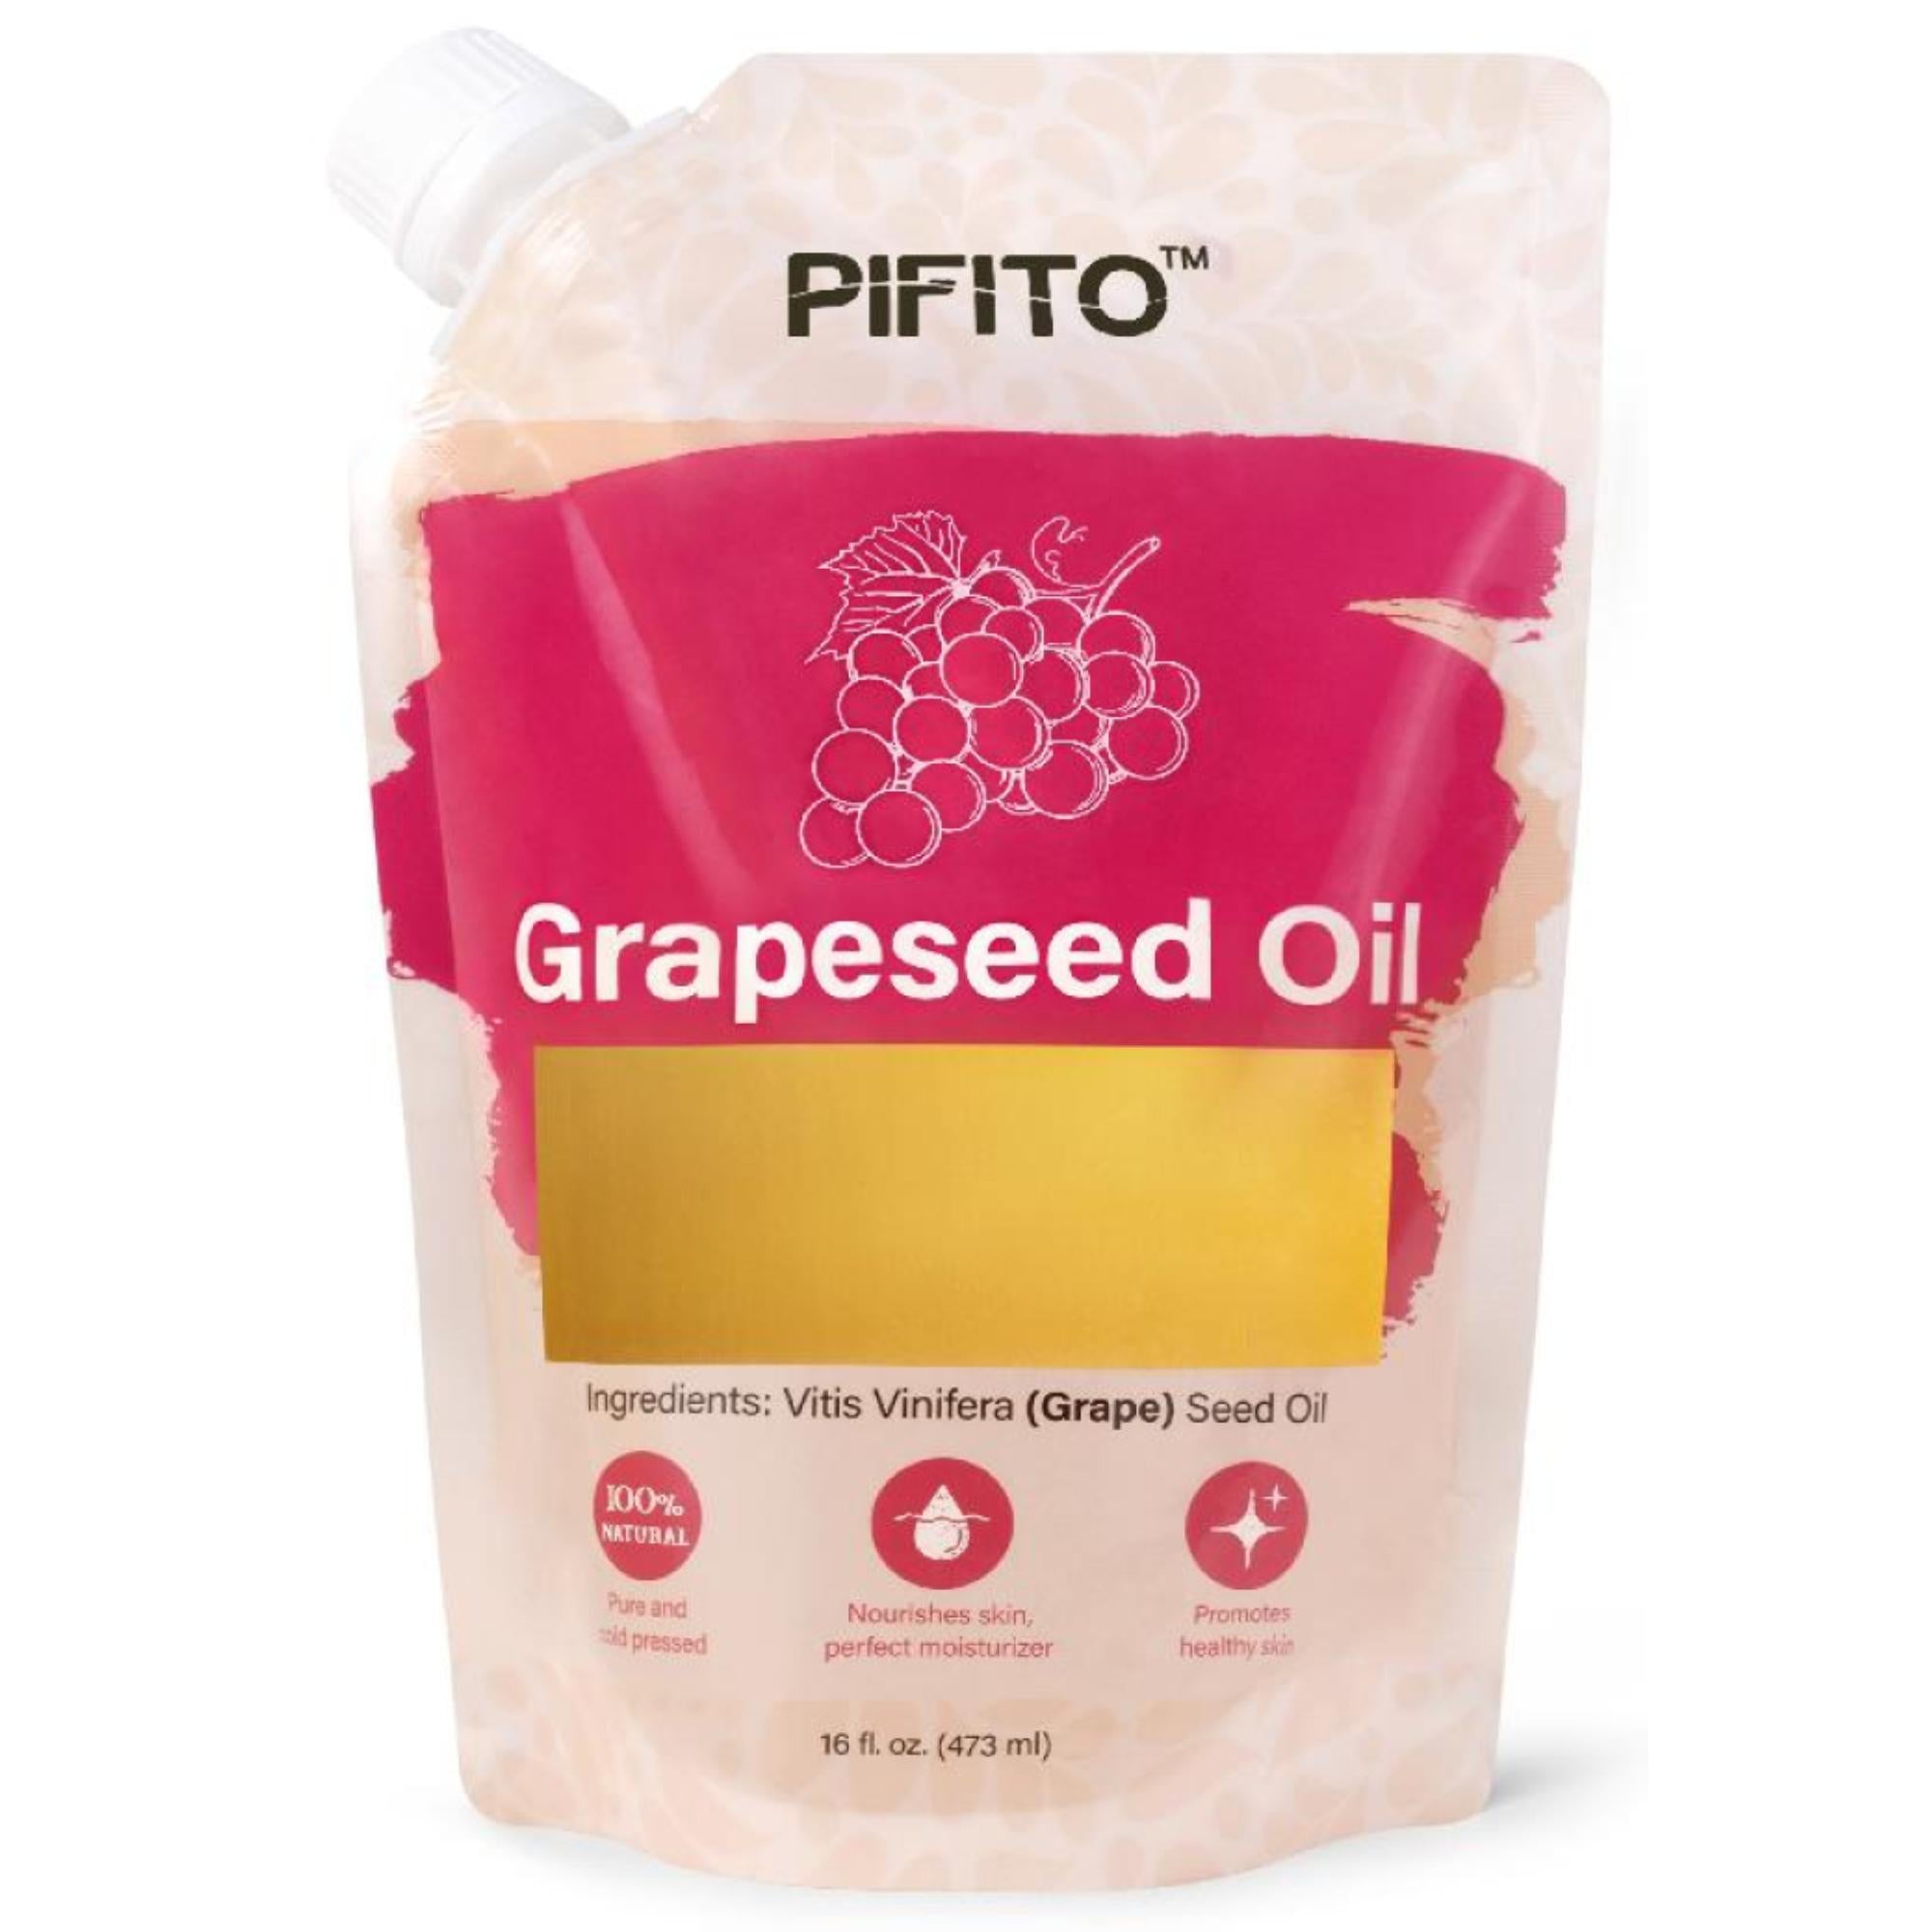 Pifito Grapeseed Oil Melt and Pour Soap Base Premium 100% 